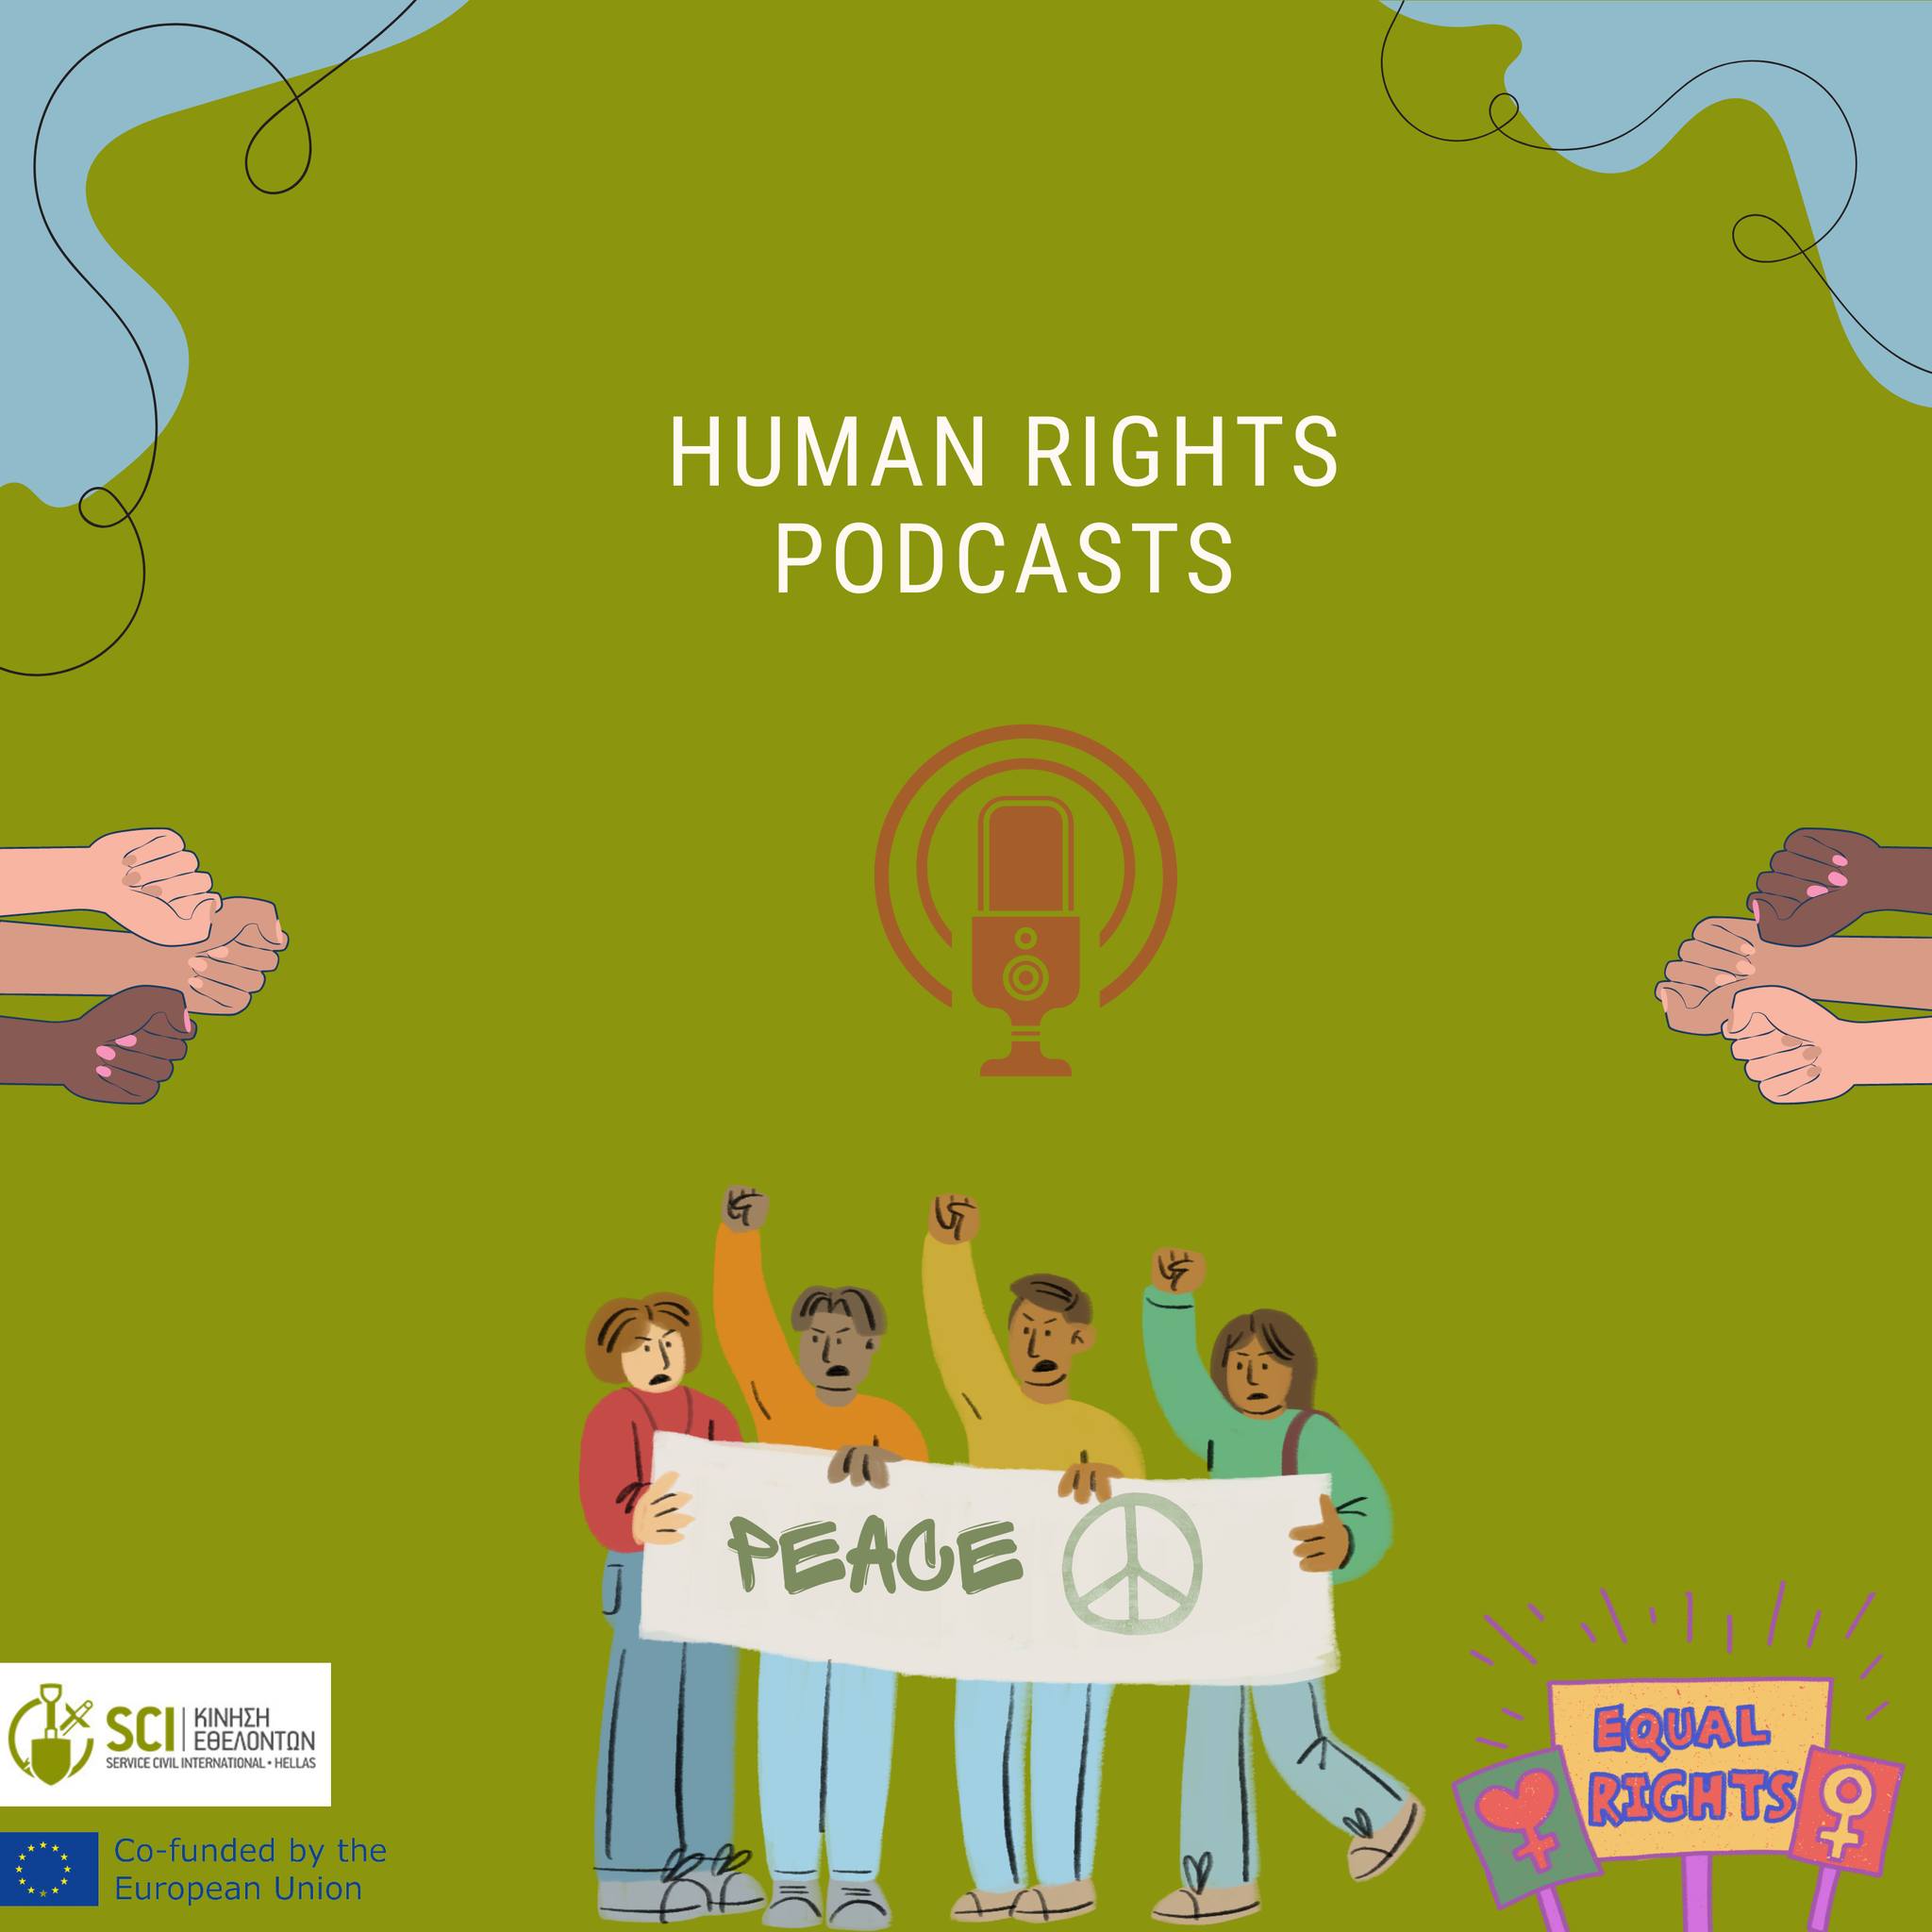 Human Rights Podcasts